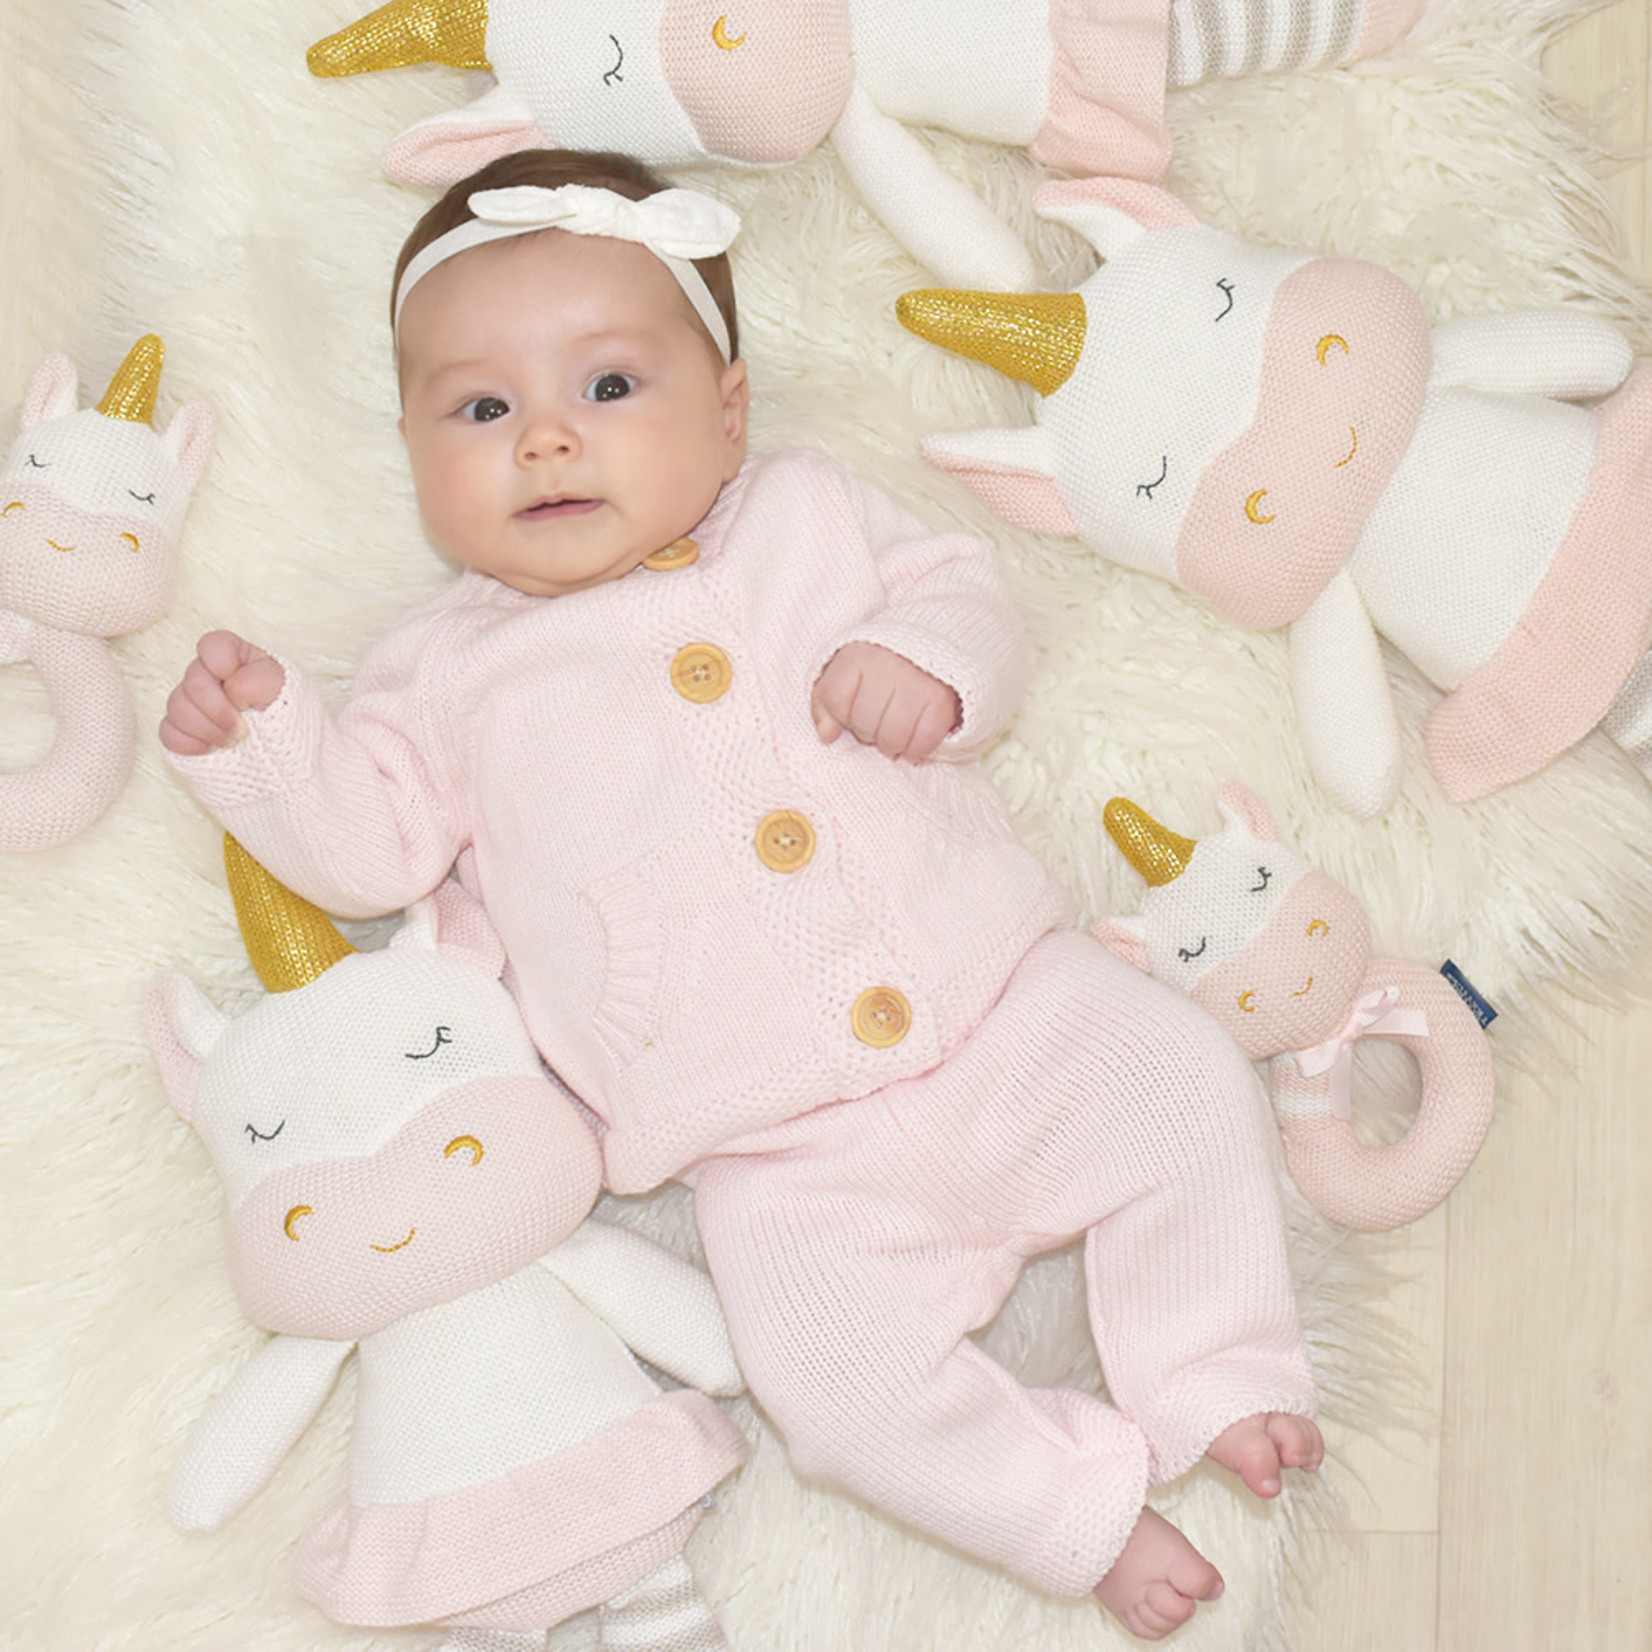 Living Textiles Softie Toy Character Kenzie the Unicorn